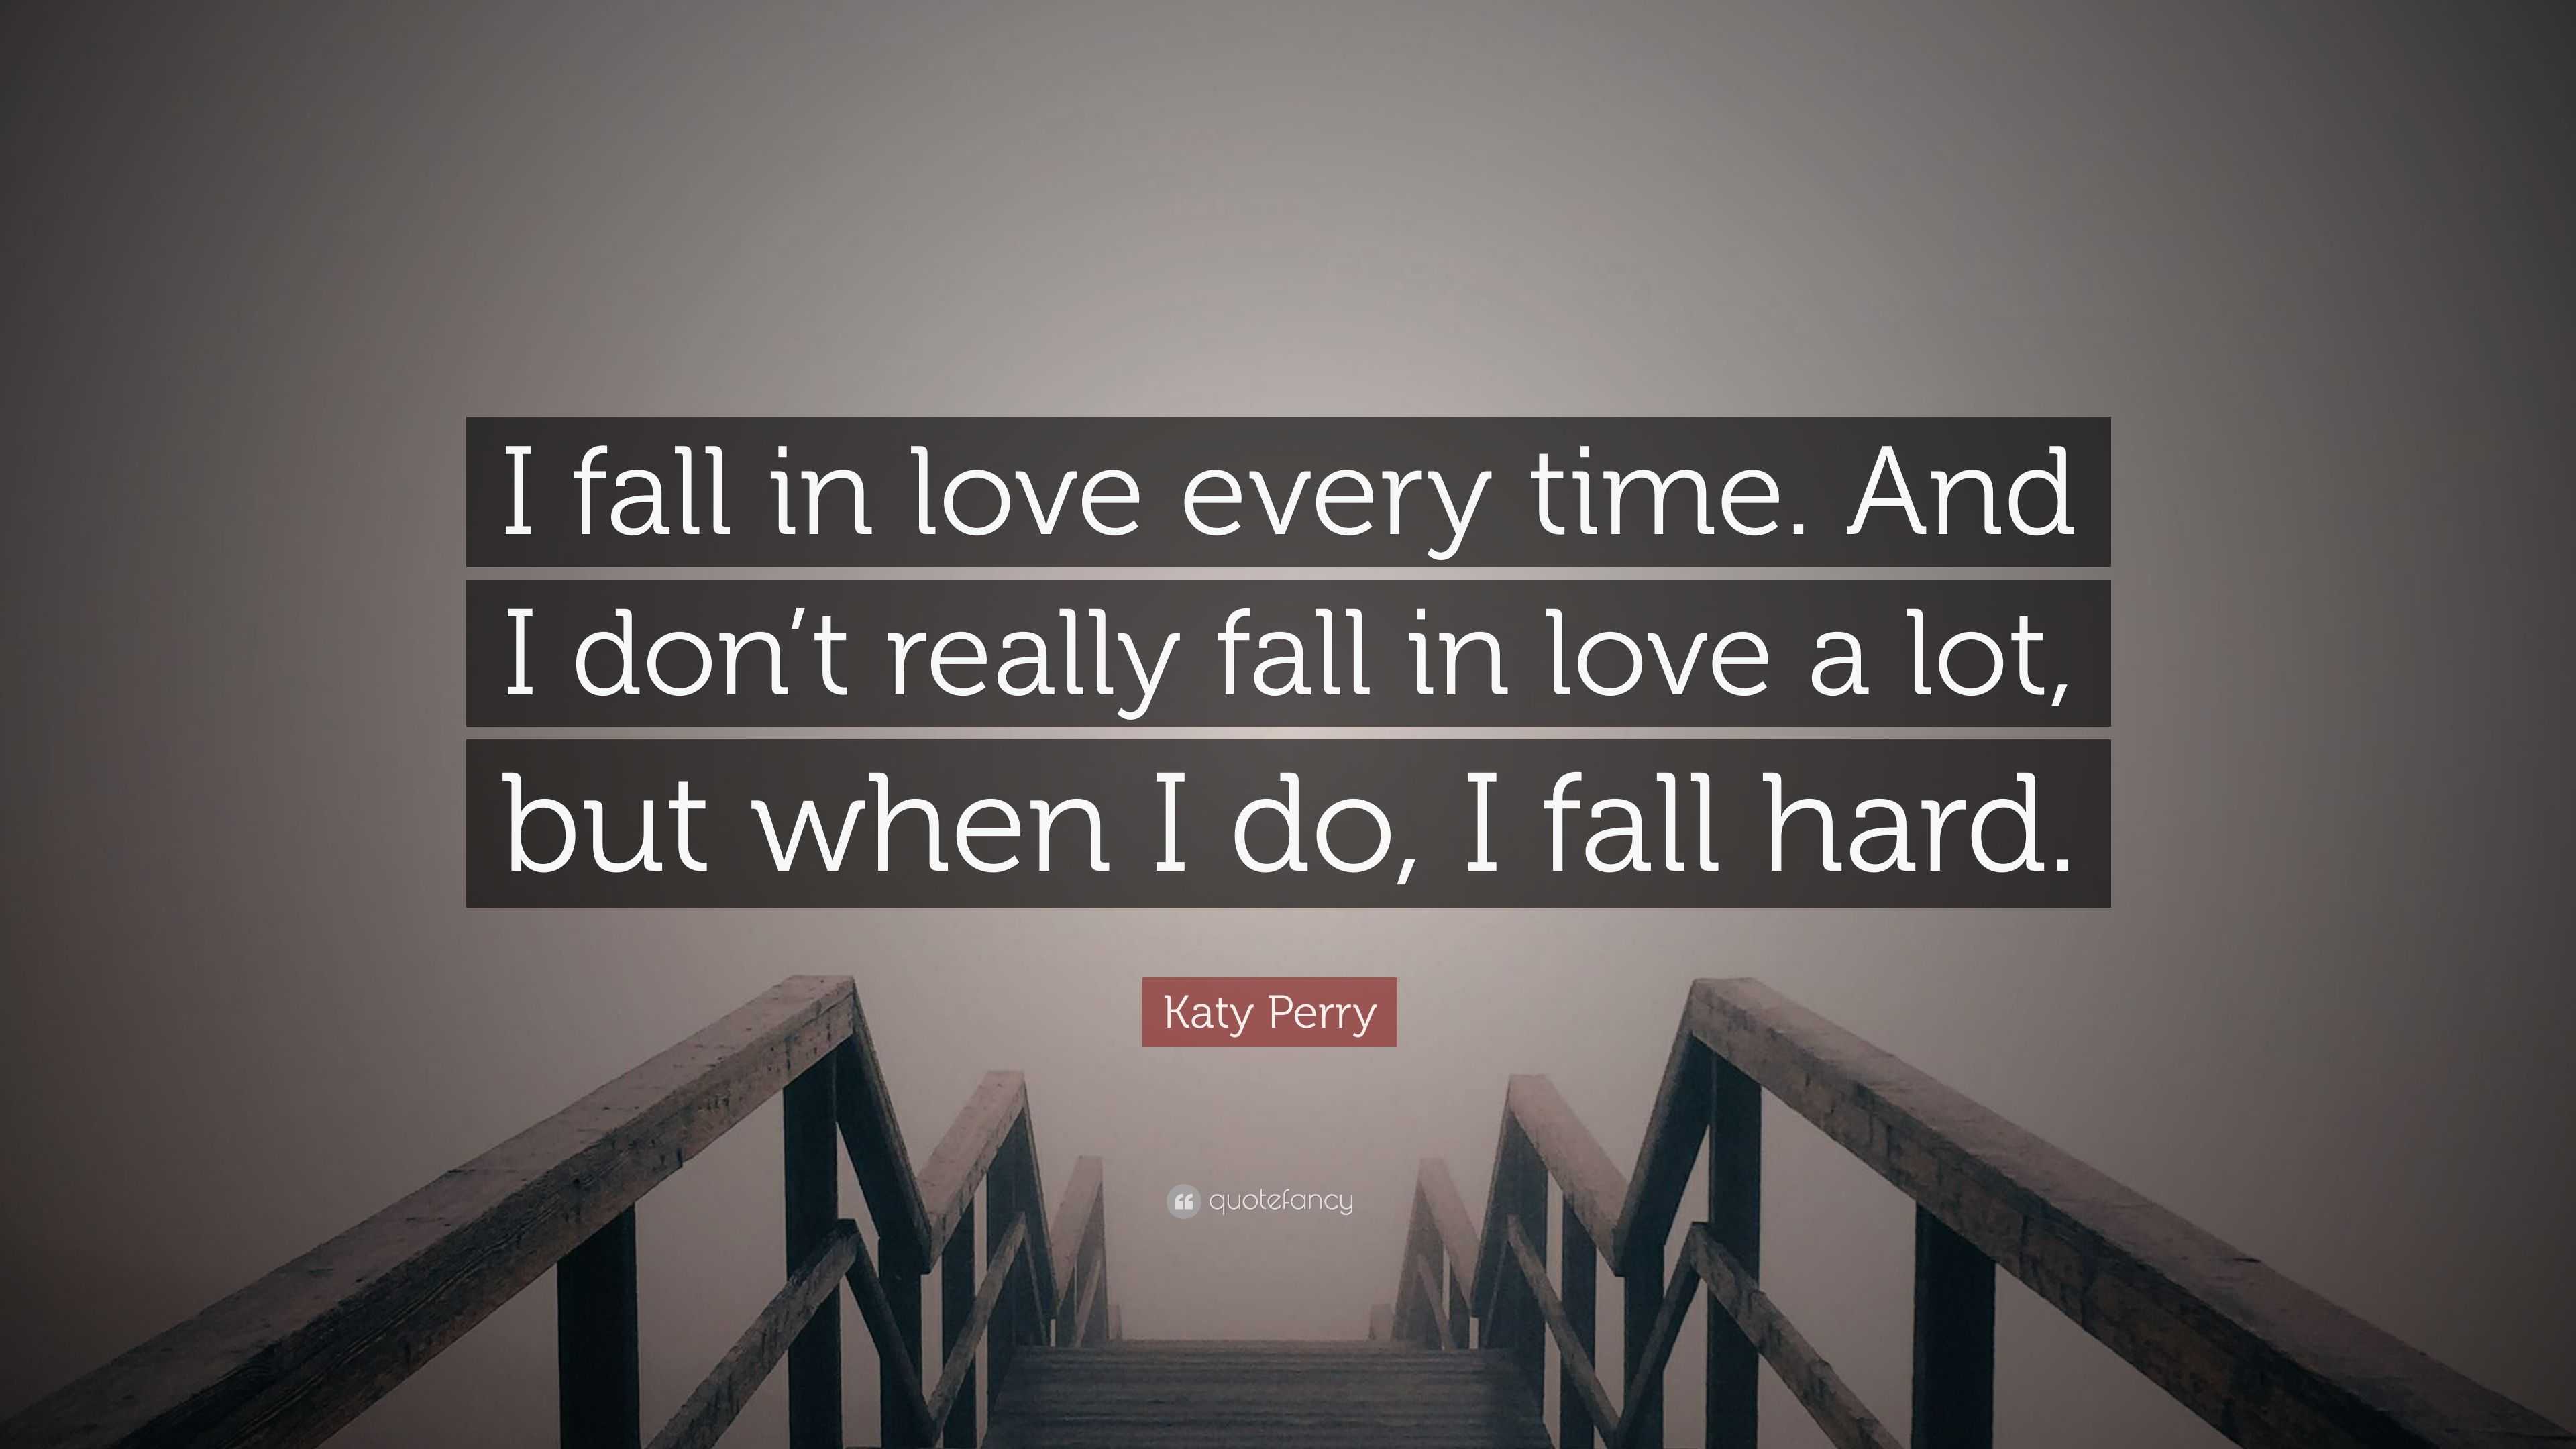 Pin on I fall in love each time